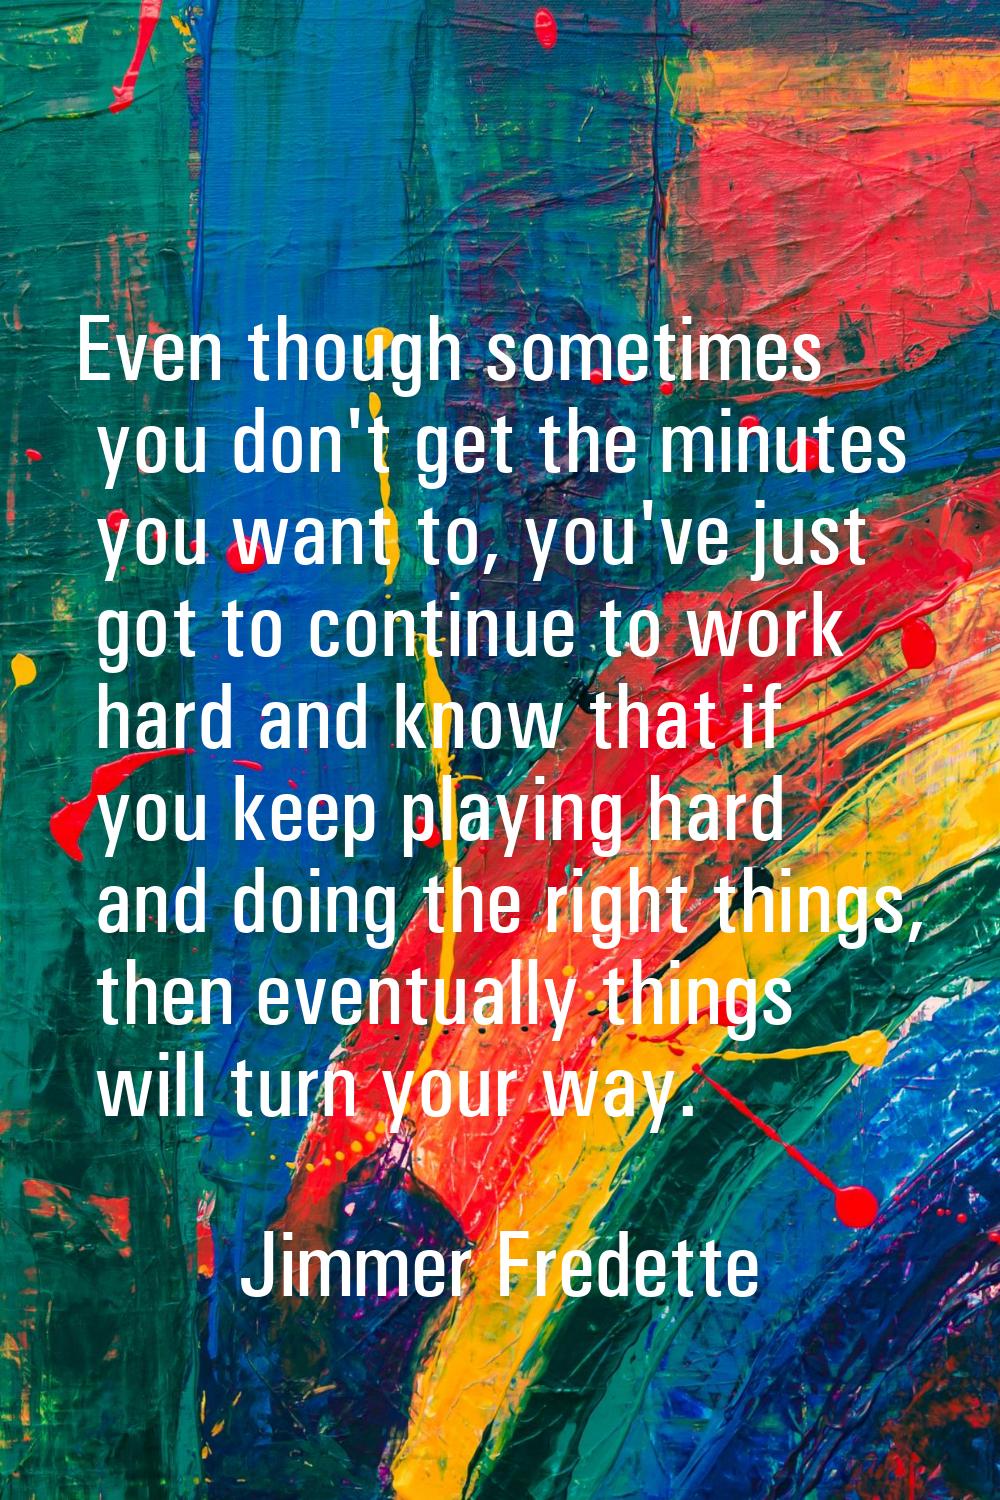 Even though sometimes you don't get the minutes you want to, you've just got to continue to work ha